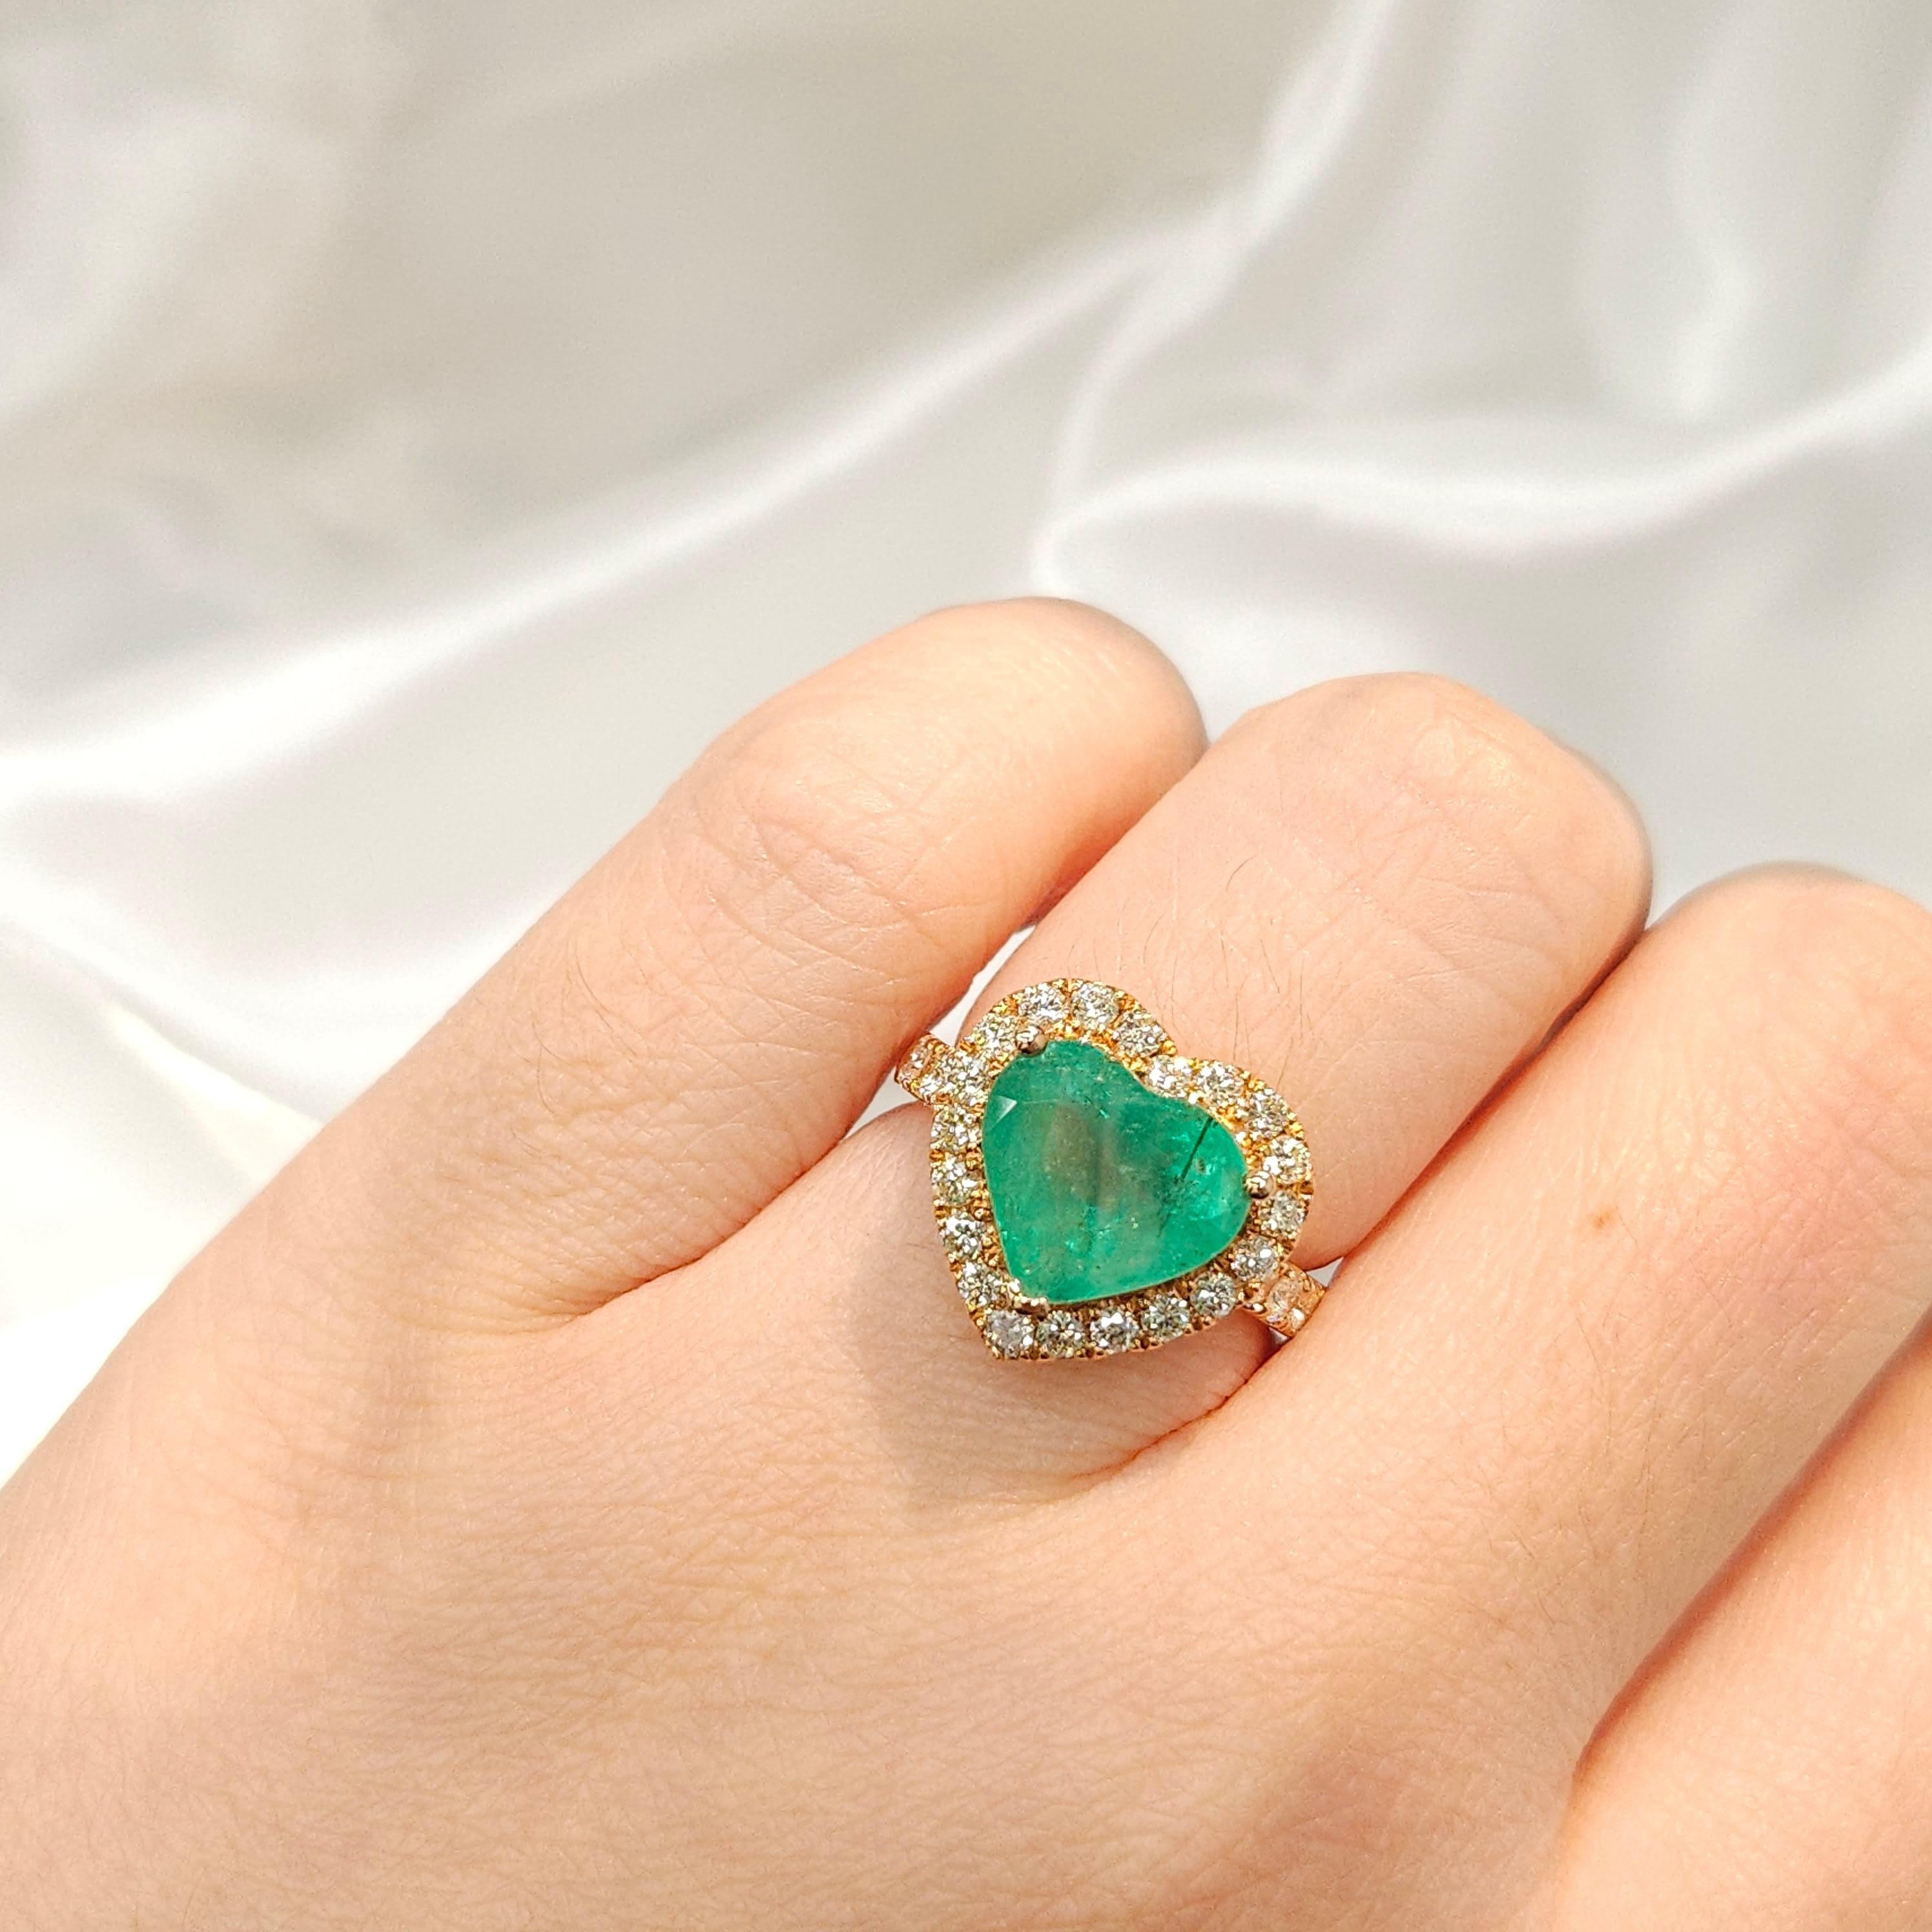 Dive into a world of unparalleled beauty with this enchanting halo ring, featuring a mesmerizing IGI Certified 3.30 Carat Brazilian Emerald that radiates an intense bluish-green hue and takes on the alluring form of a heart shape. The vivid color